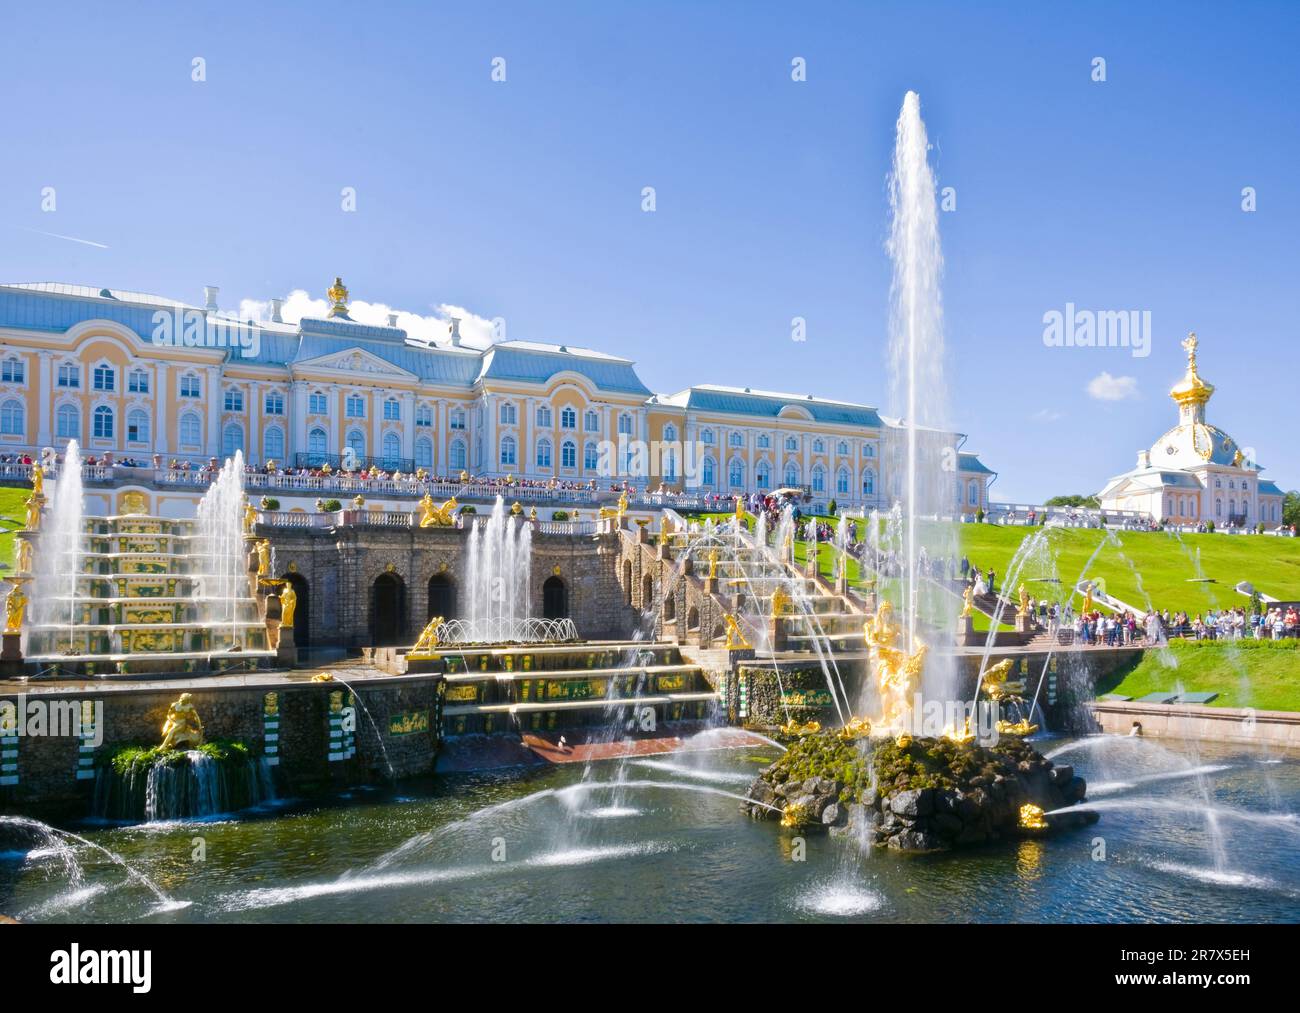 Historical Peterhof Palace of Russia with water fountains, golden statues and sculptures in St Petersburg Stock Photo